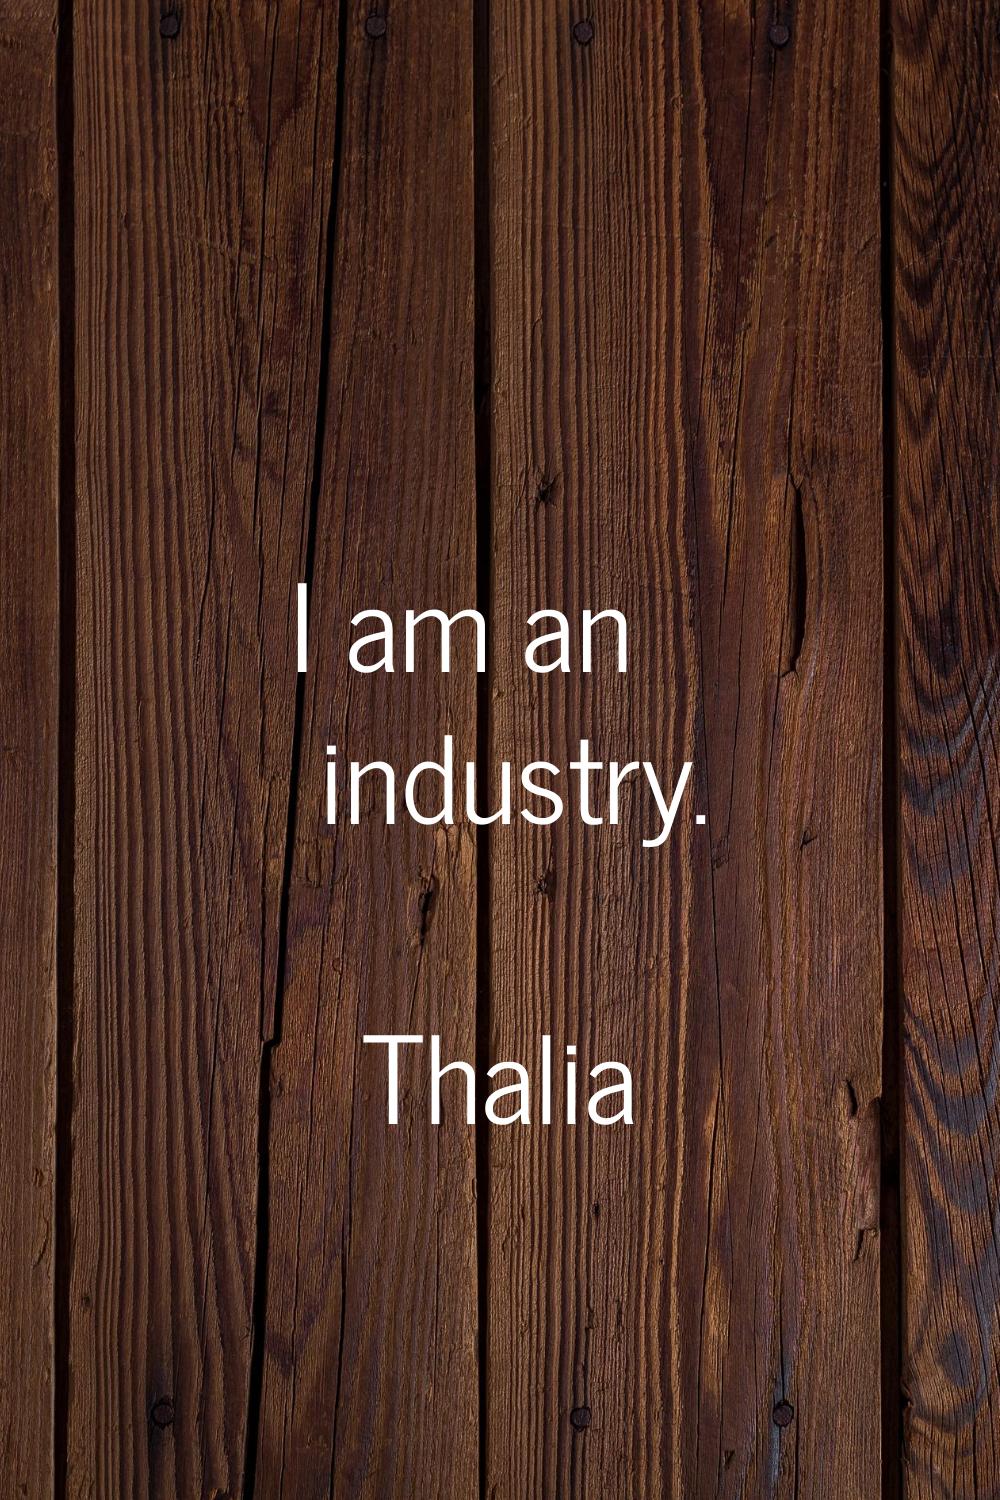 I am an industry.